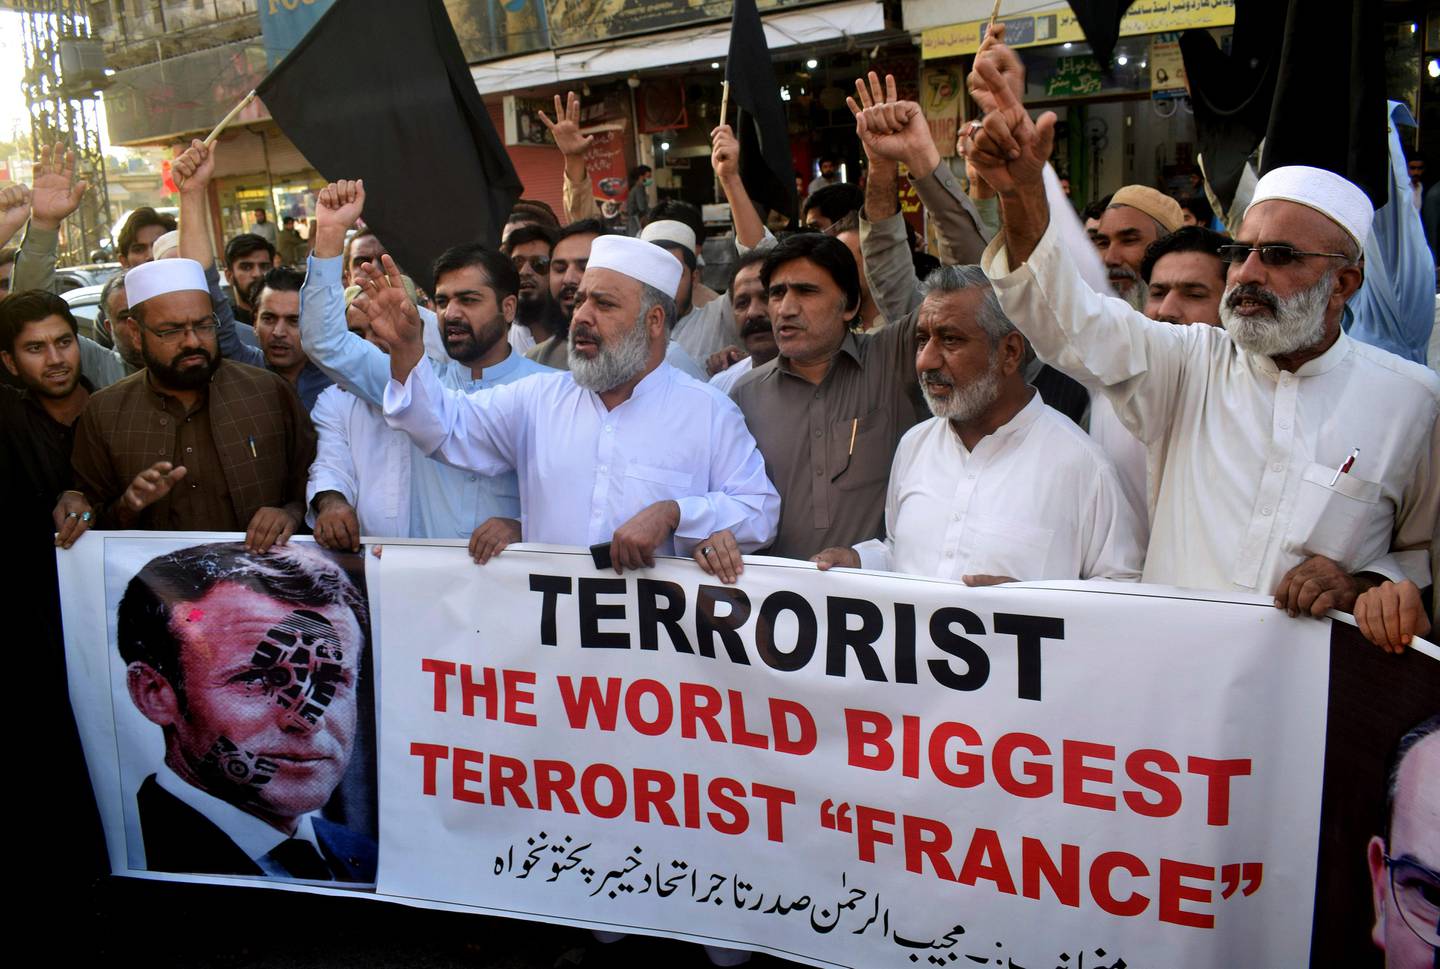 Pakistan traders hold a banner with a defaced picture of French President Emmanuel Macron during a protest against the publishing of caricatures of the Prophet Muhammad they deem blasphemous, in Peshawar, Pakistan, Monday, Oct. 26, 2020. Pakistan's Prime Minister Imran Khan said the French leader chose to encourage anti-Muslim sentiment and deliberately provoke Muslims by encouraging the display of blasphemous cartoons targeting Islam. (AP Photo/Muhammad Sajjad)